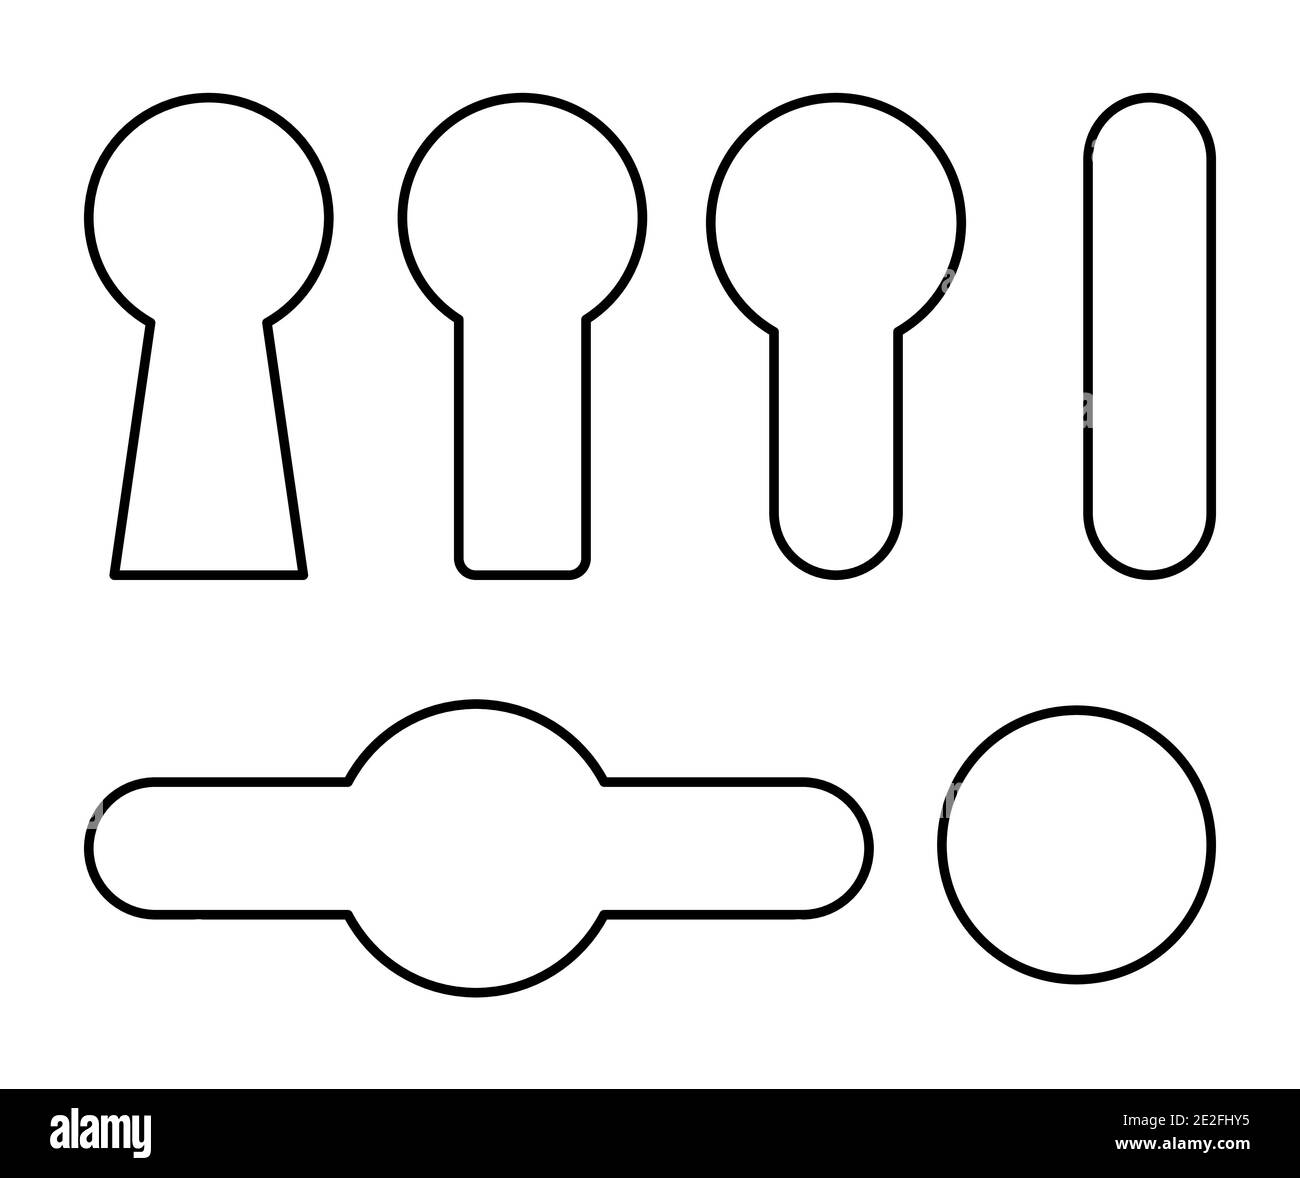 Keyhole outline symbol set. Line contour shapes collections with lock holes icons. Concept of spy protection and curiosity. Vector design isolated on Stock Vector